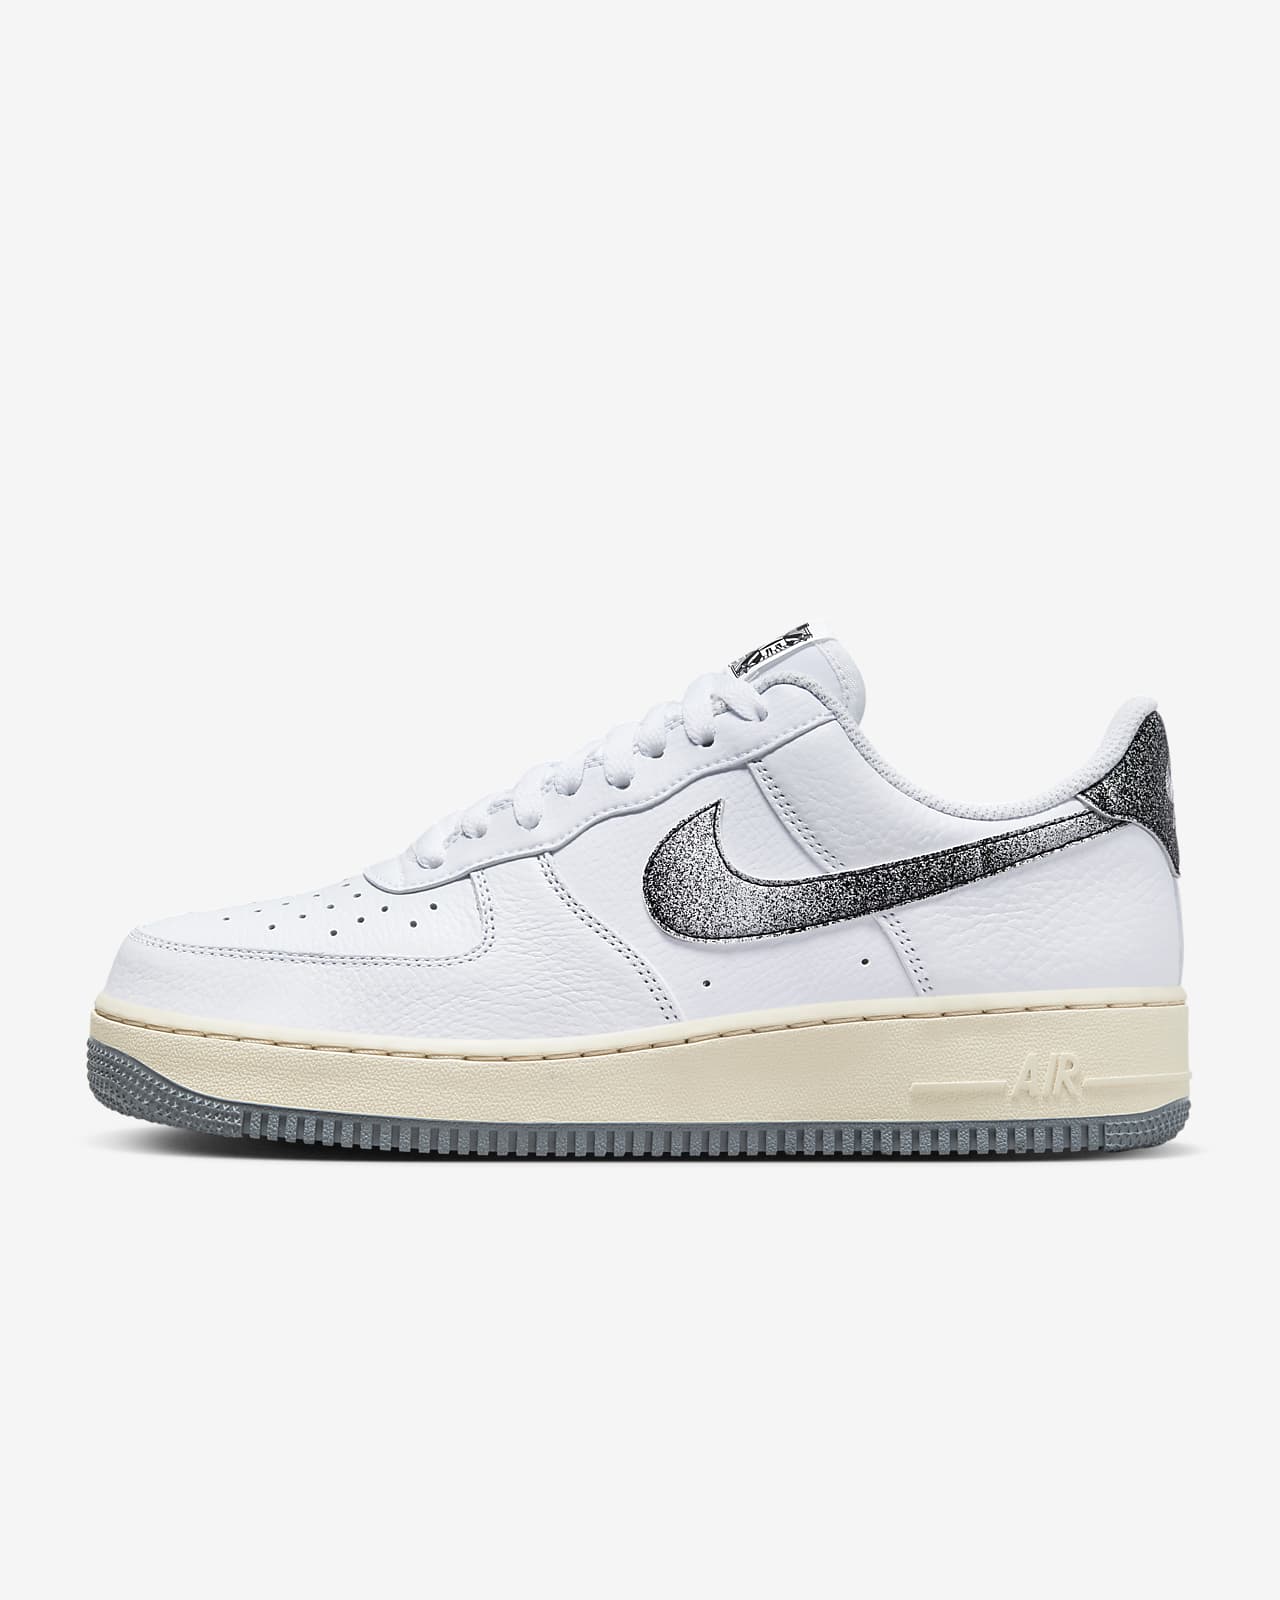 Nike Air Force 1 07 LX Mens Shoes Review